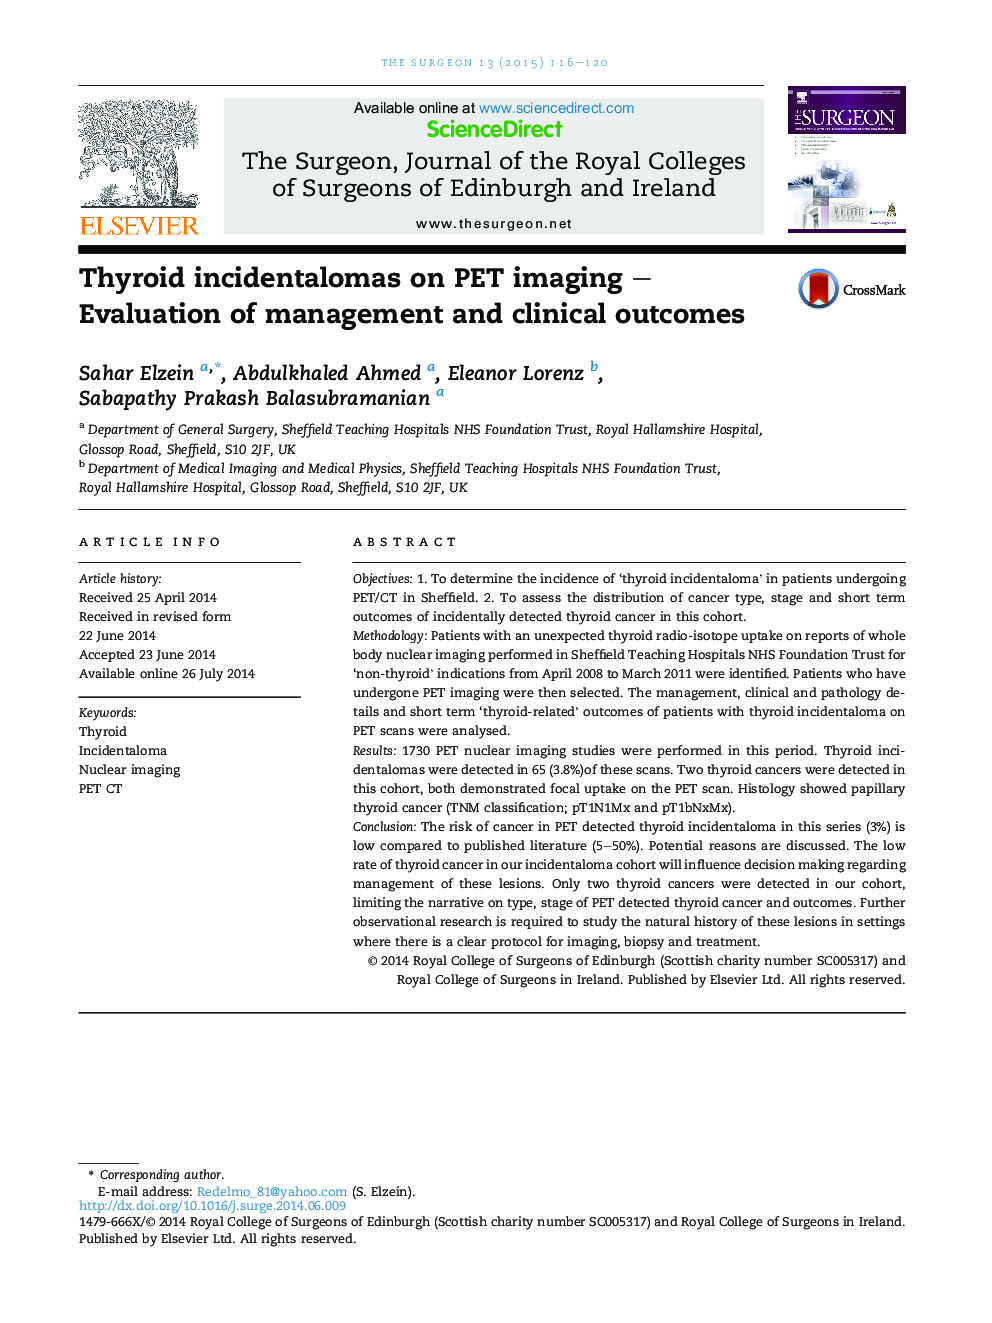 Thyroid incidentalomas on PET imaging – Evaluation of management and clinical outcomes